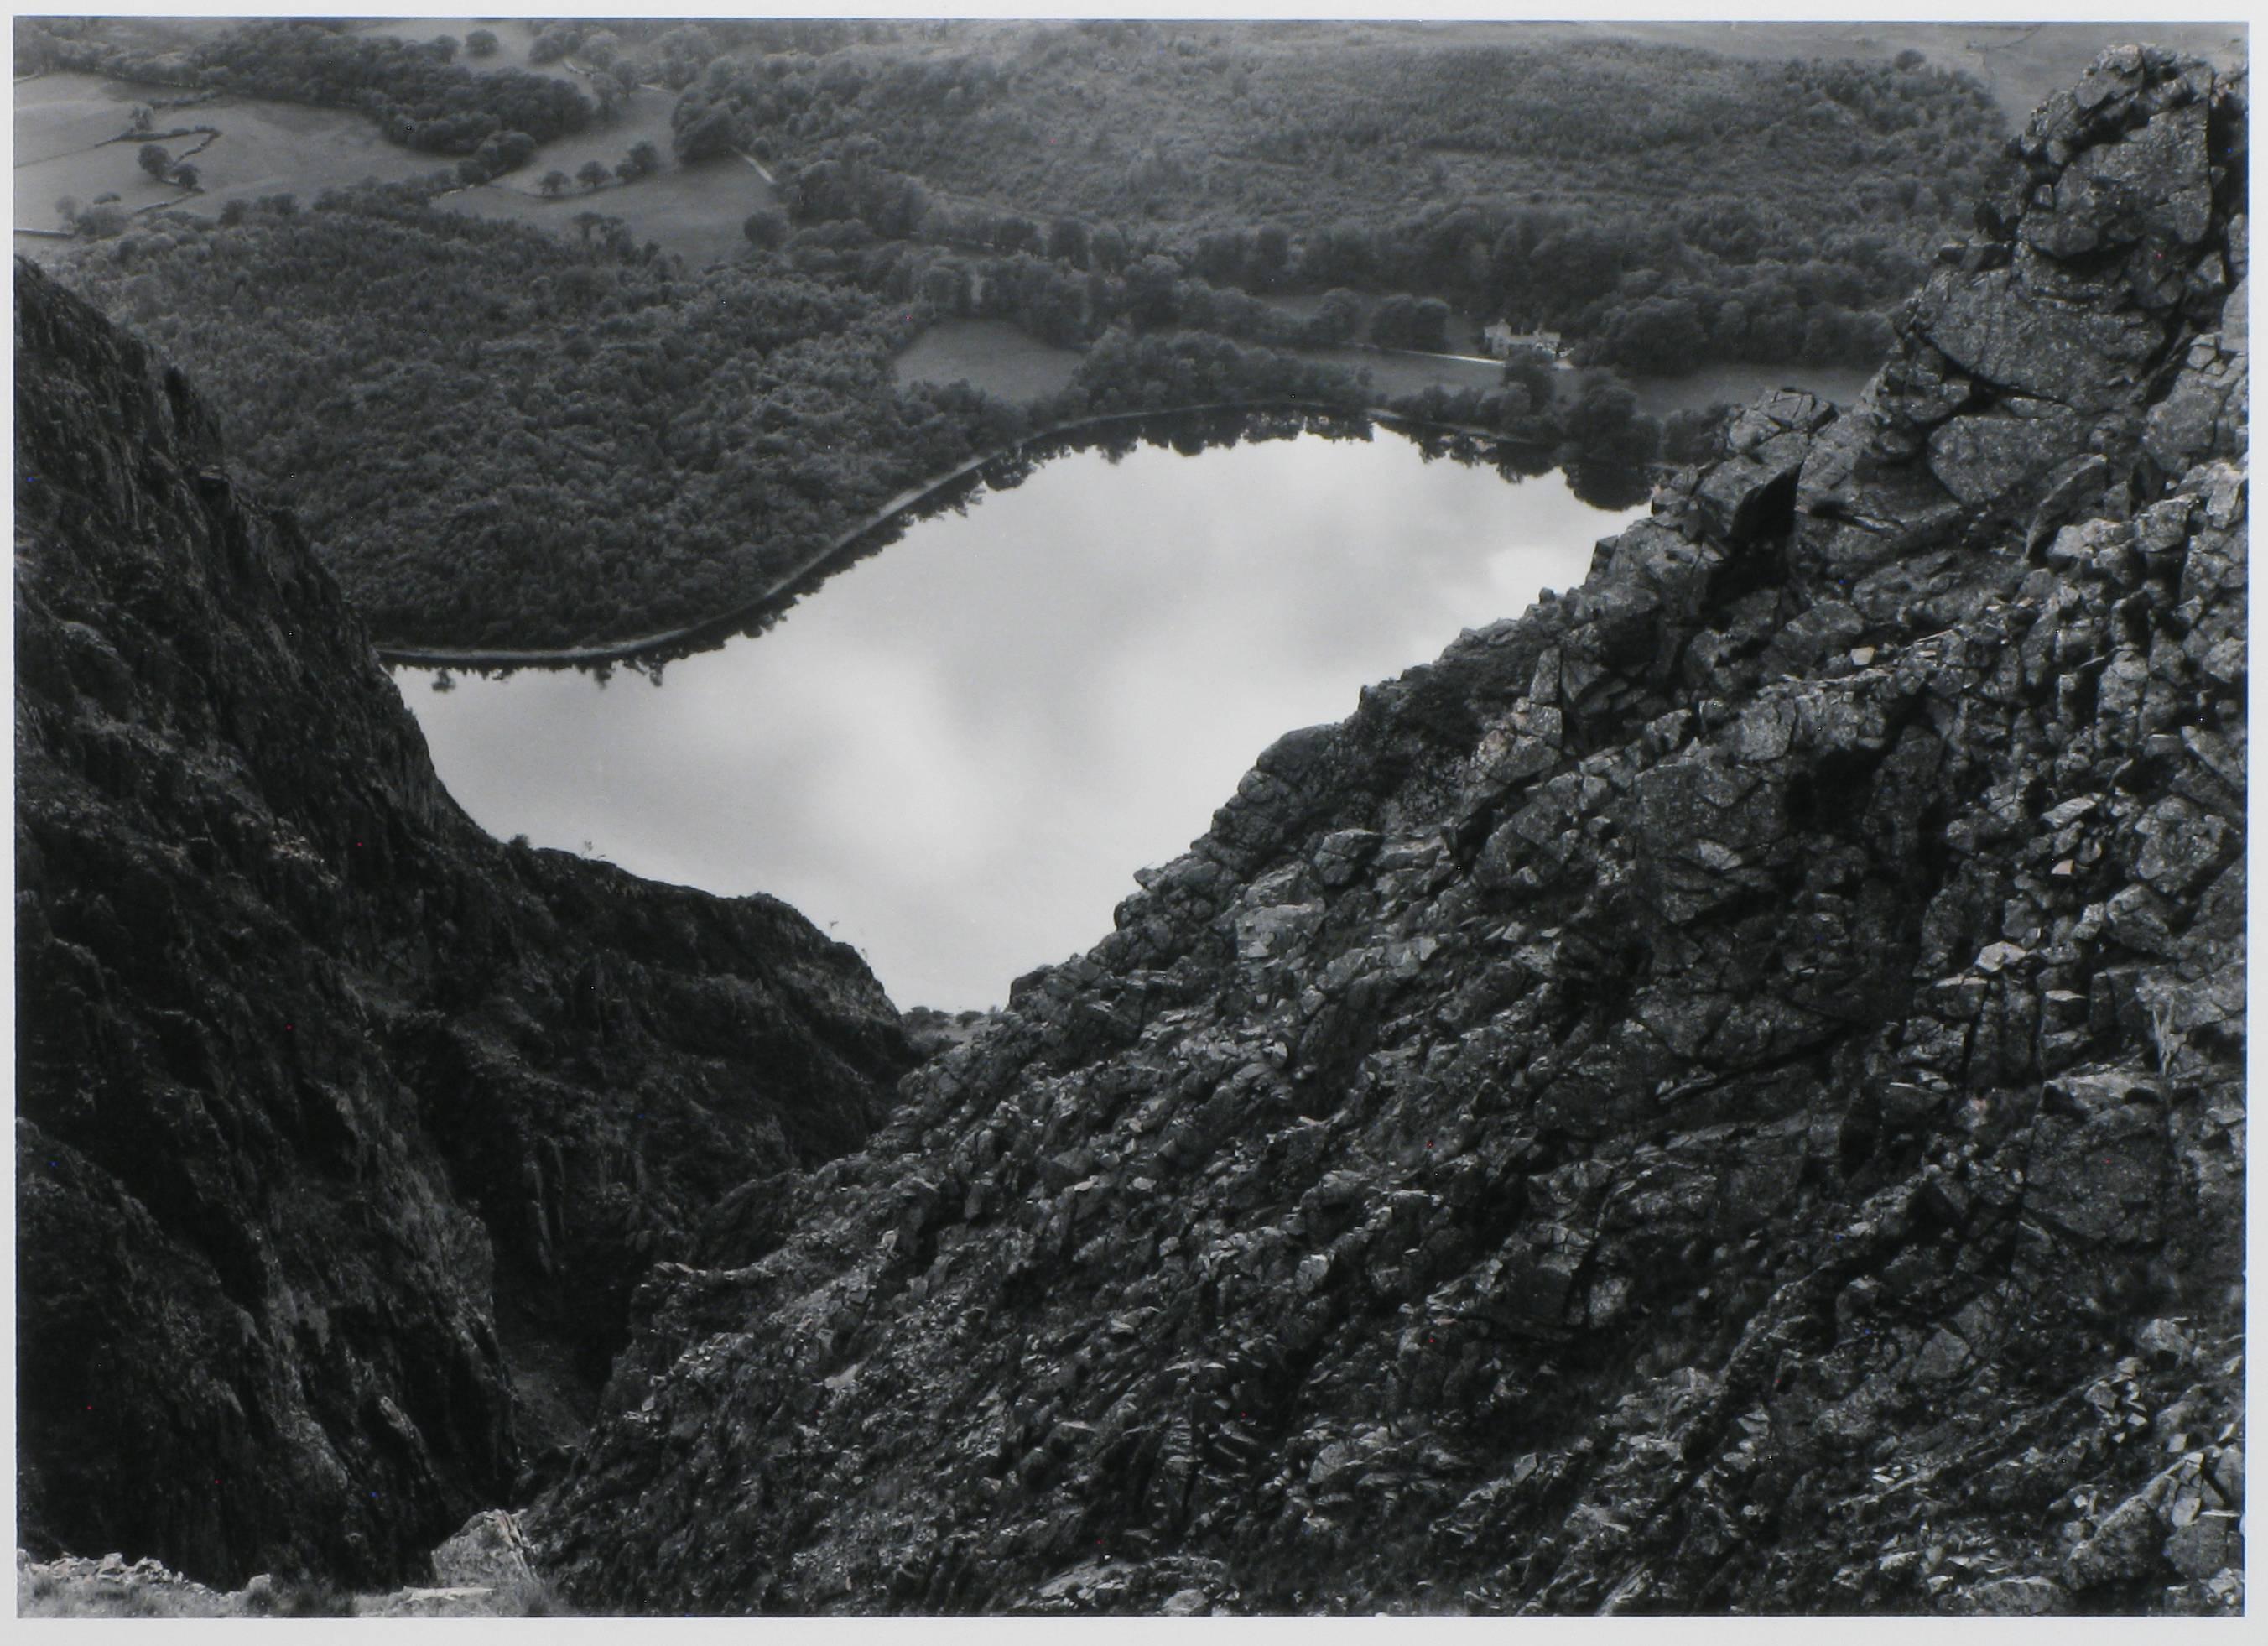 Edward Ranney Black and White Photograph - Wastwater from Whinn Rigg, Cumbria, England